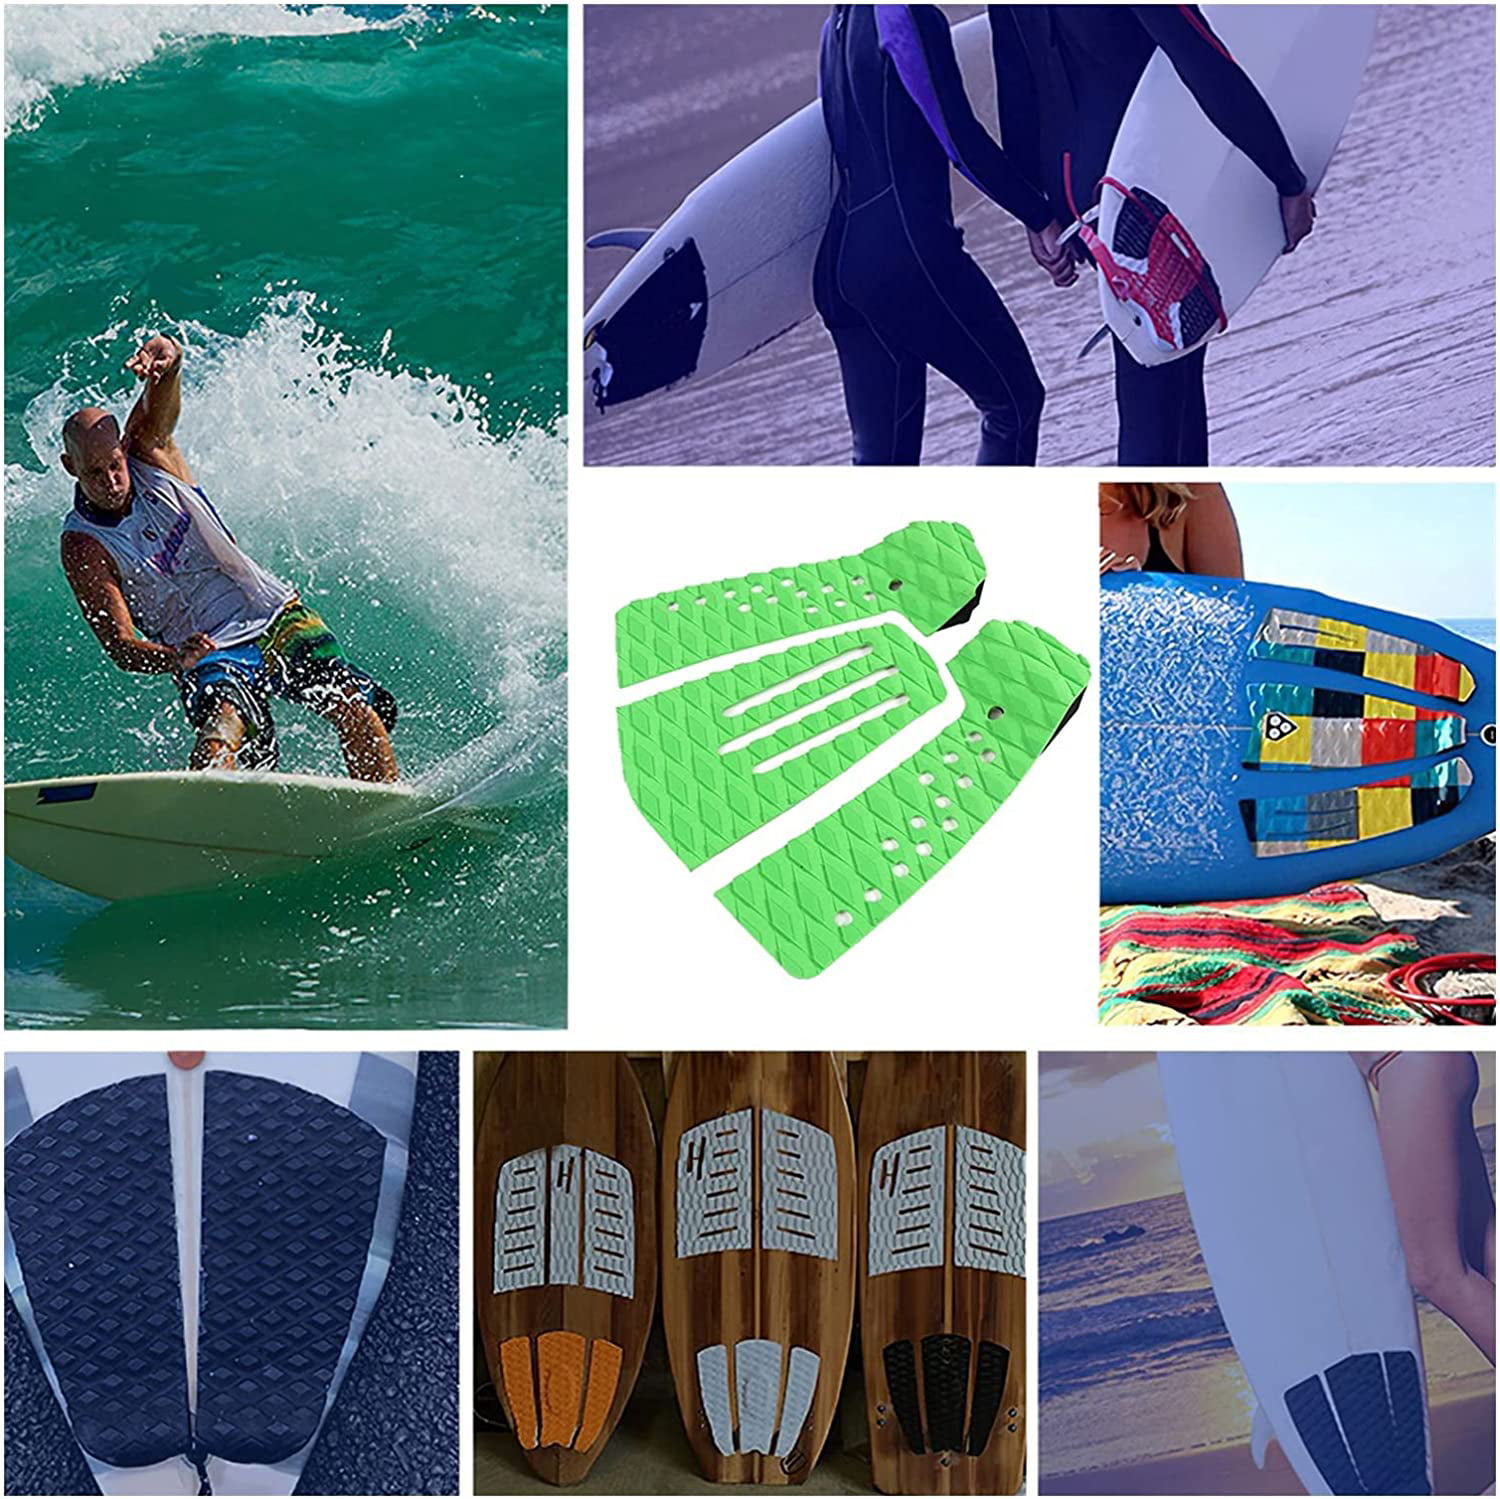 3 Count Adhesive Traction Pad Deck Grip for Surfing Fish Skimboard Longboard 